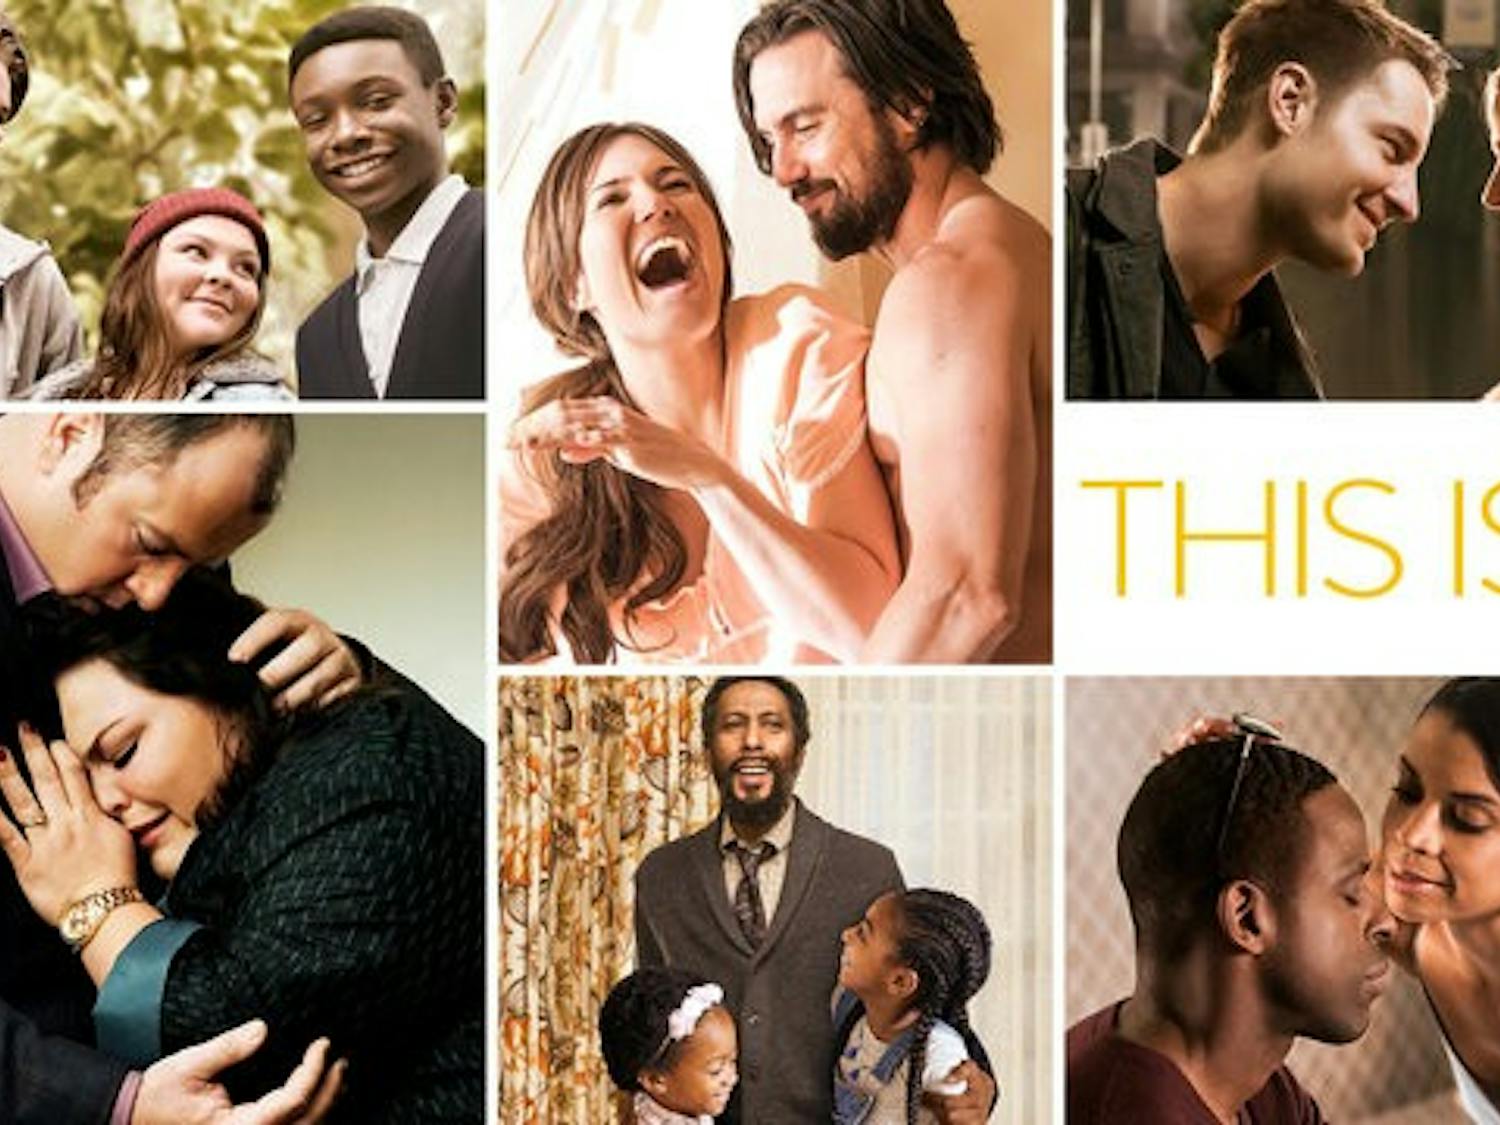 Catch the second season of "This Is Us" every Tuesday on NBC at 8 p.m.